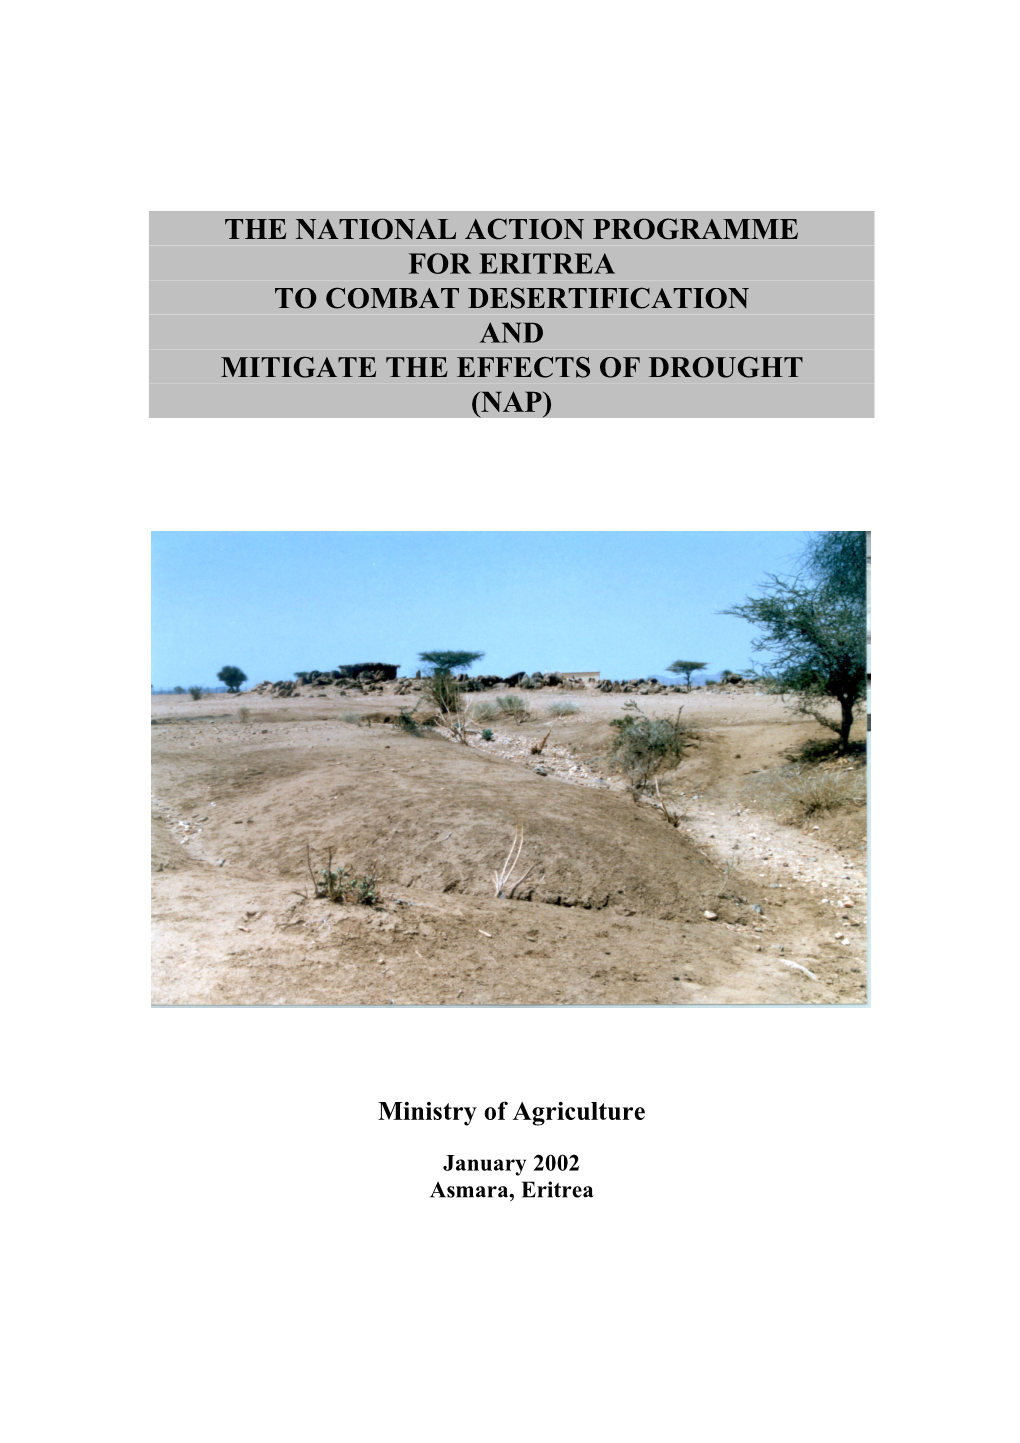 The National Action Programme for Eritrea to Combat Desertification and Mitigate the Effects of Drought (Nap)